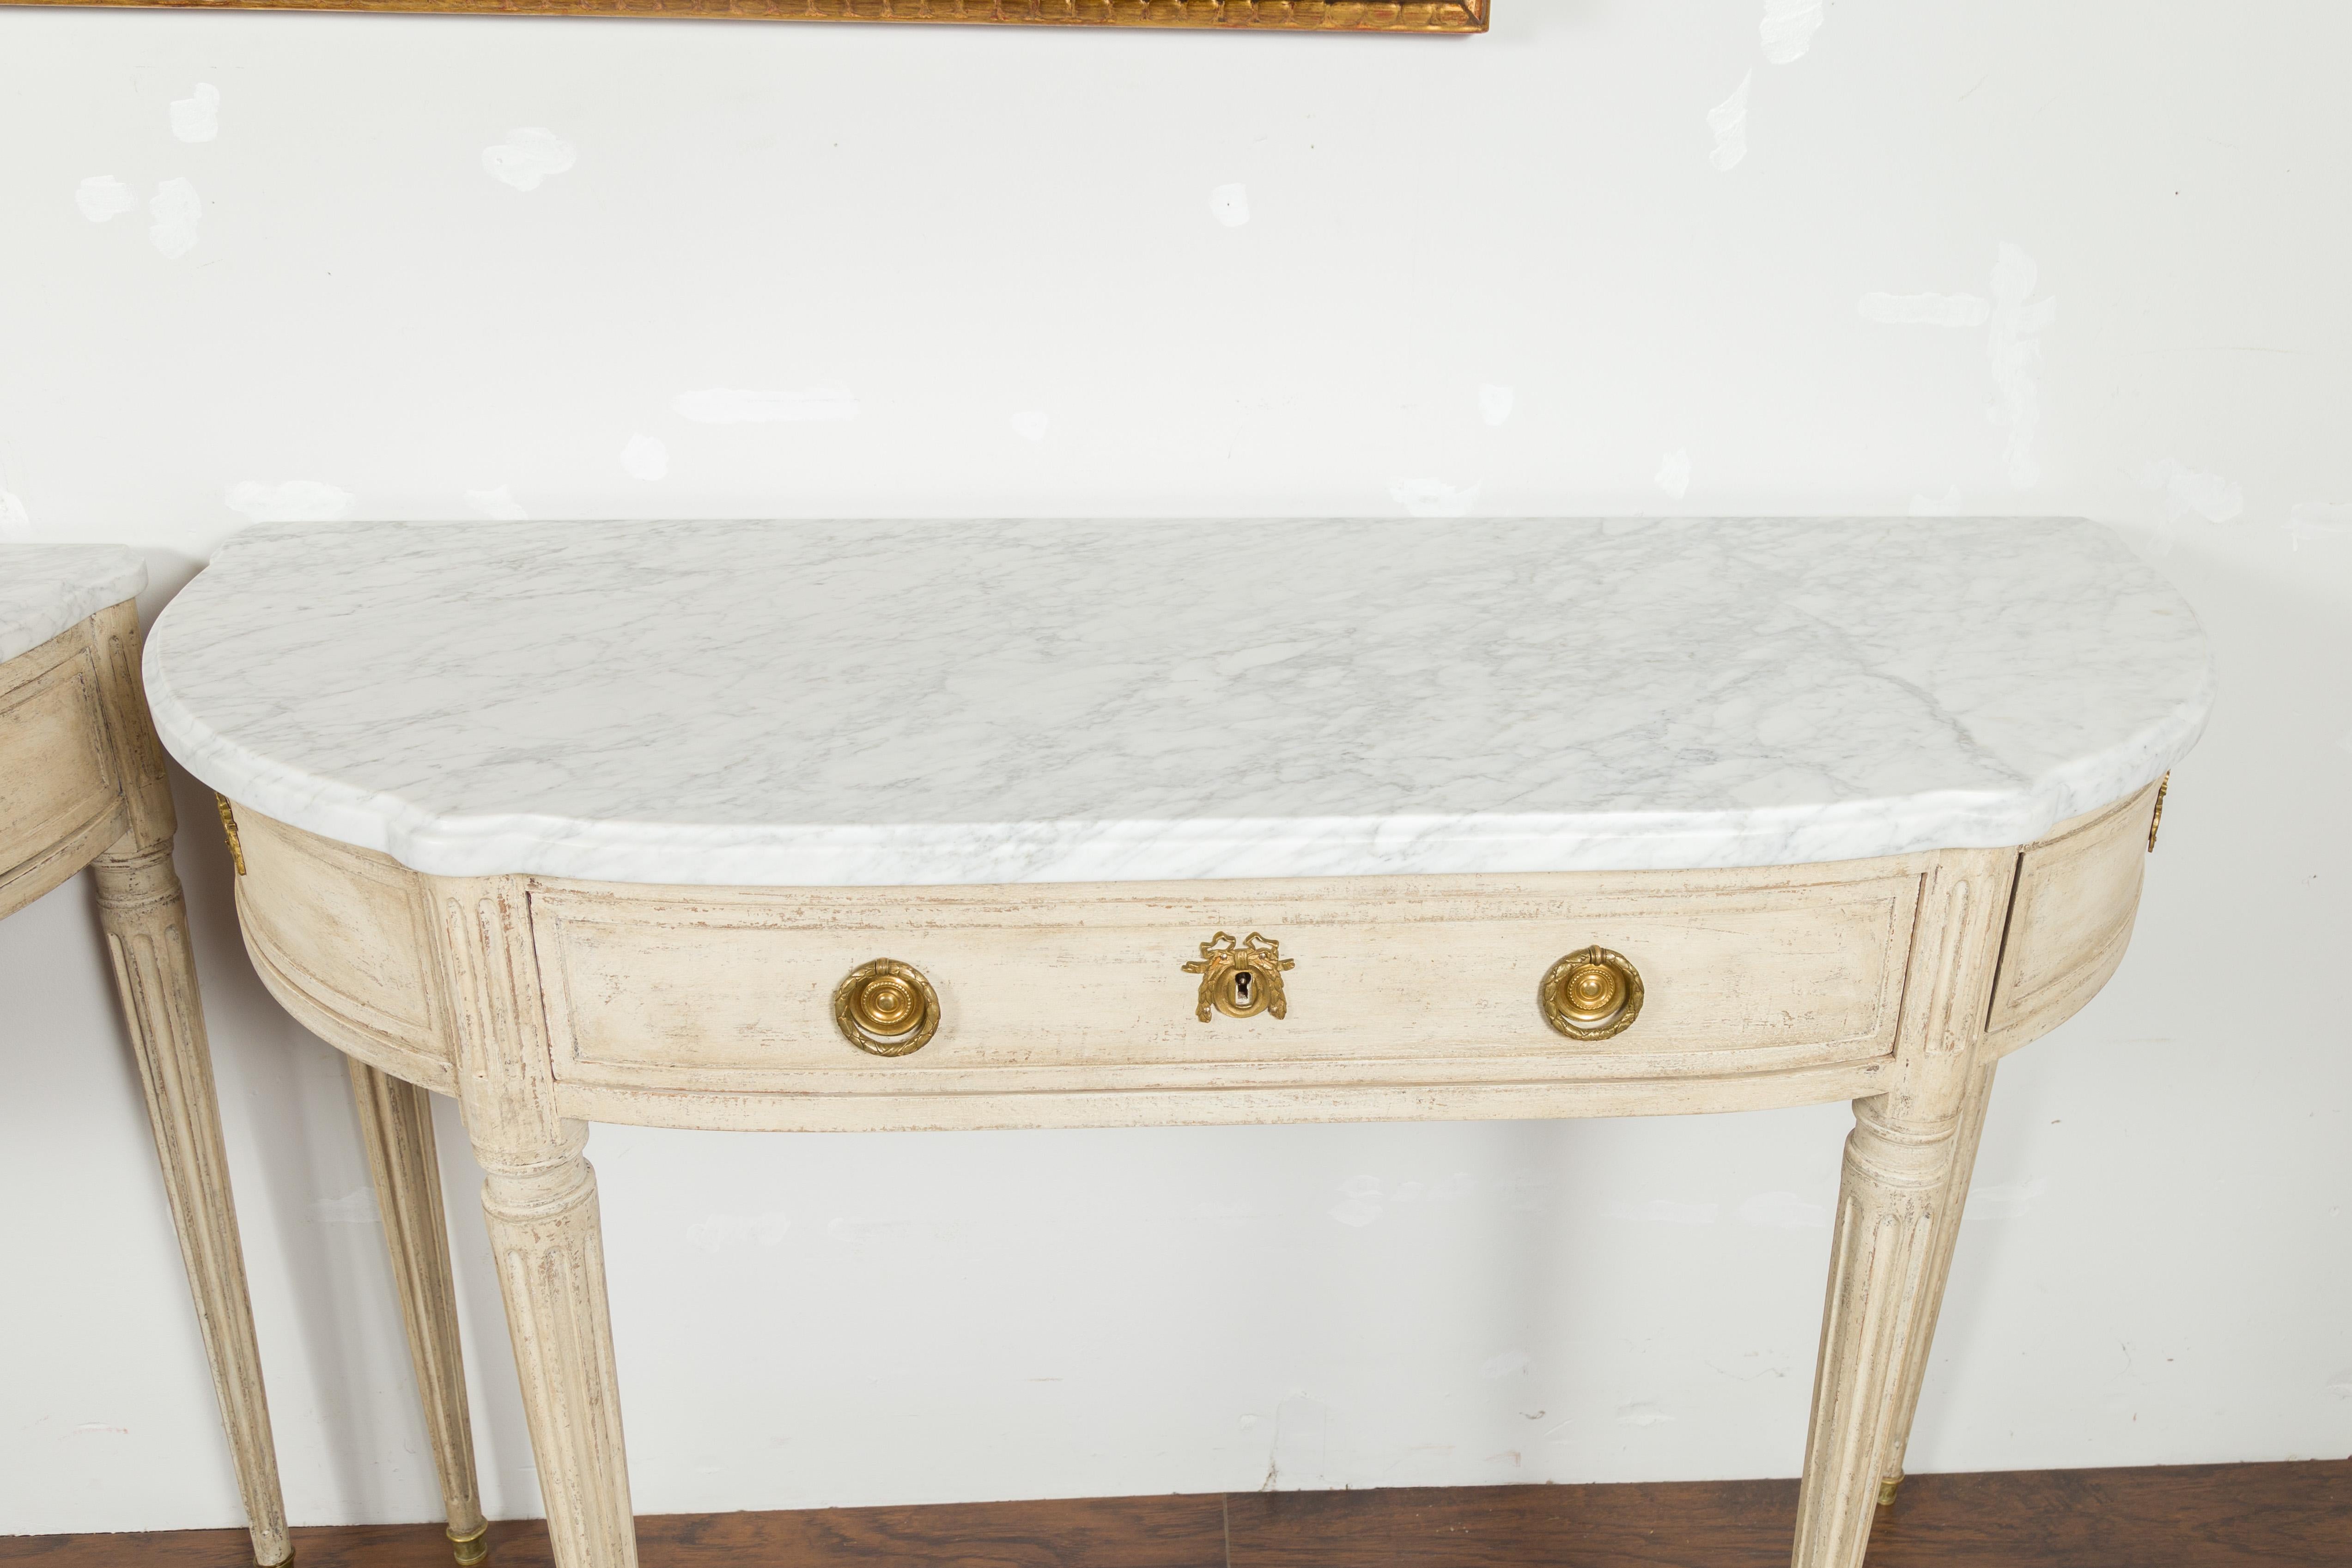 Pair of French 19th Century Neoclassical Style Demilune Tables with Marble Tops For Sale 3